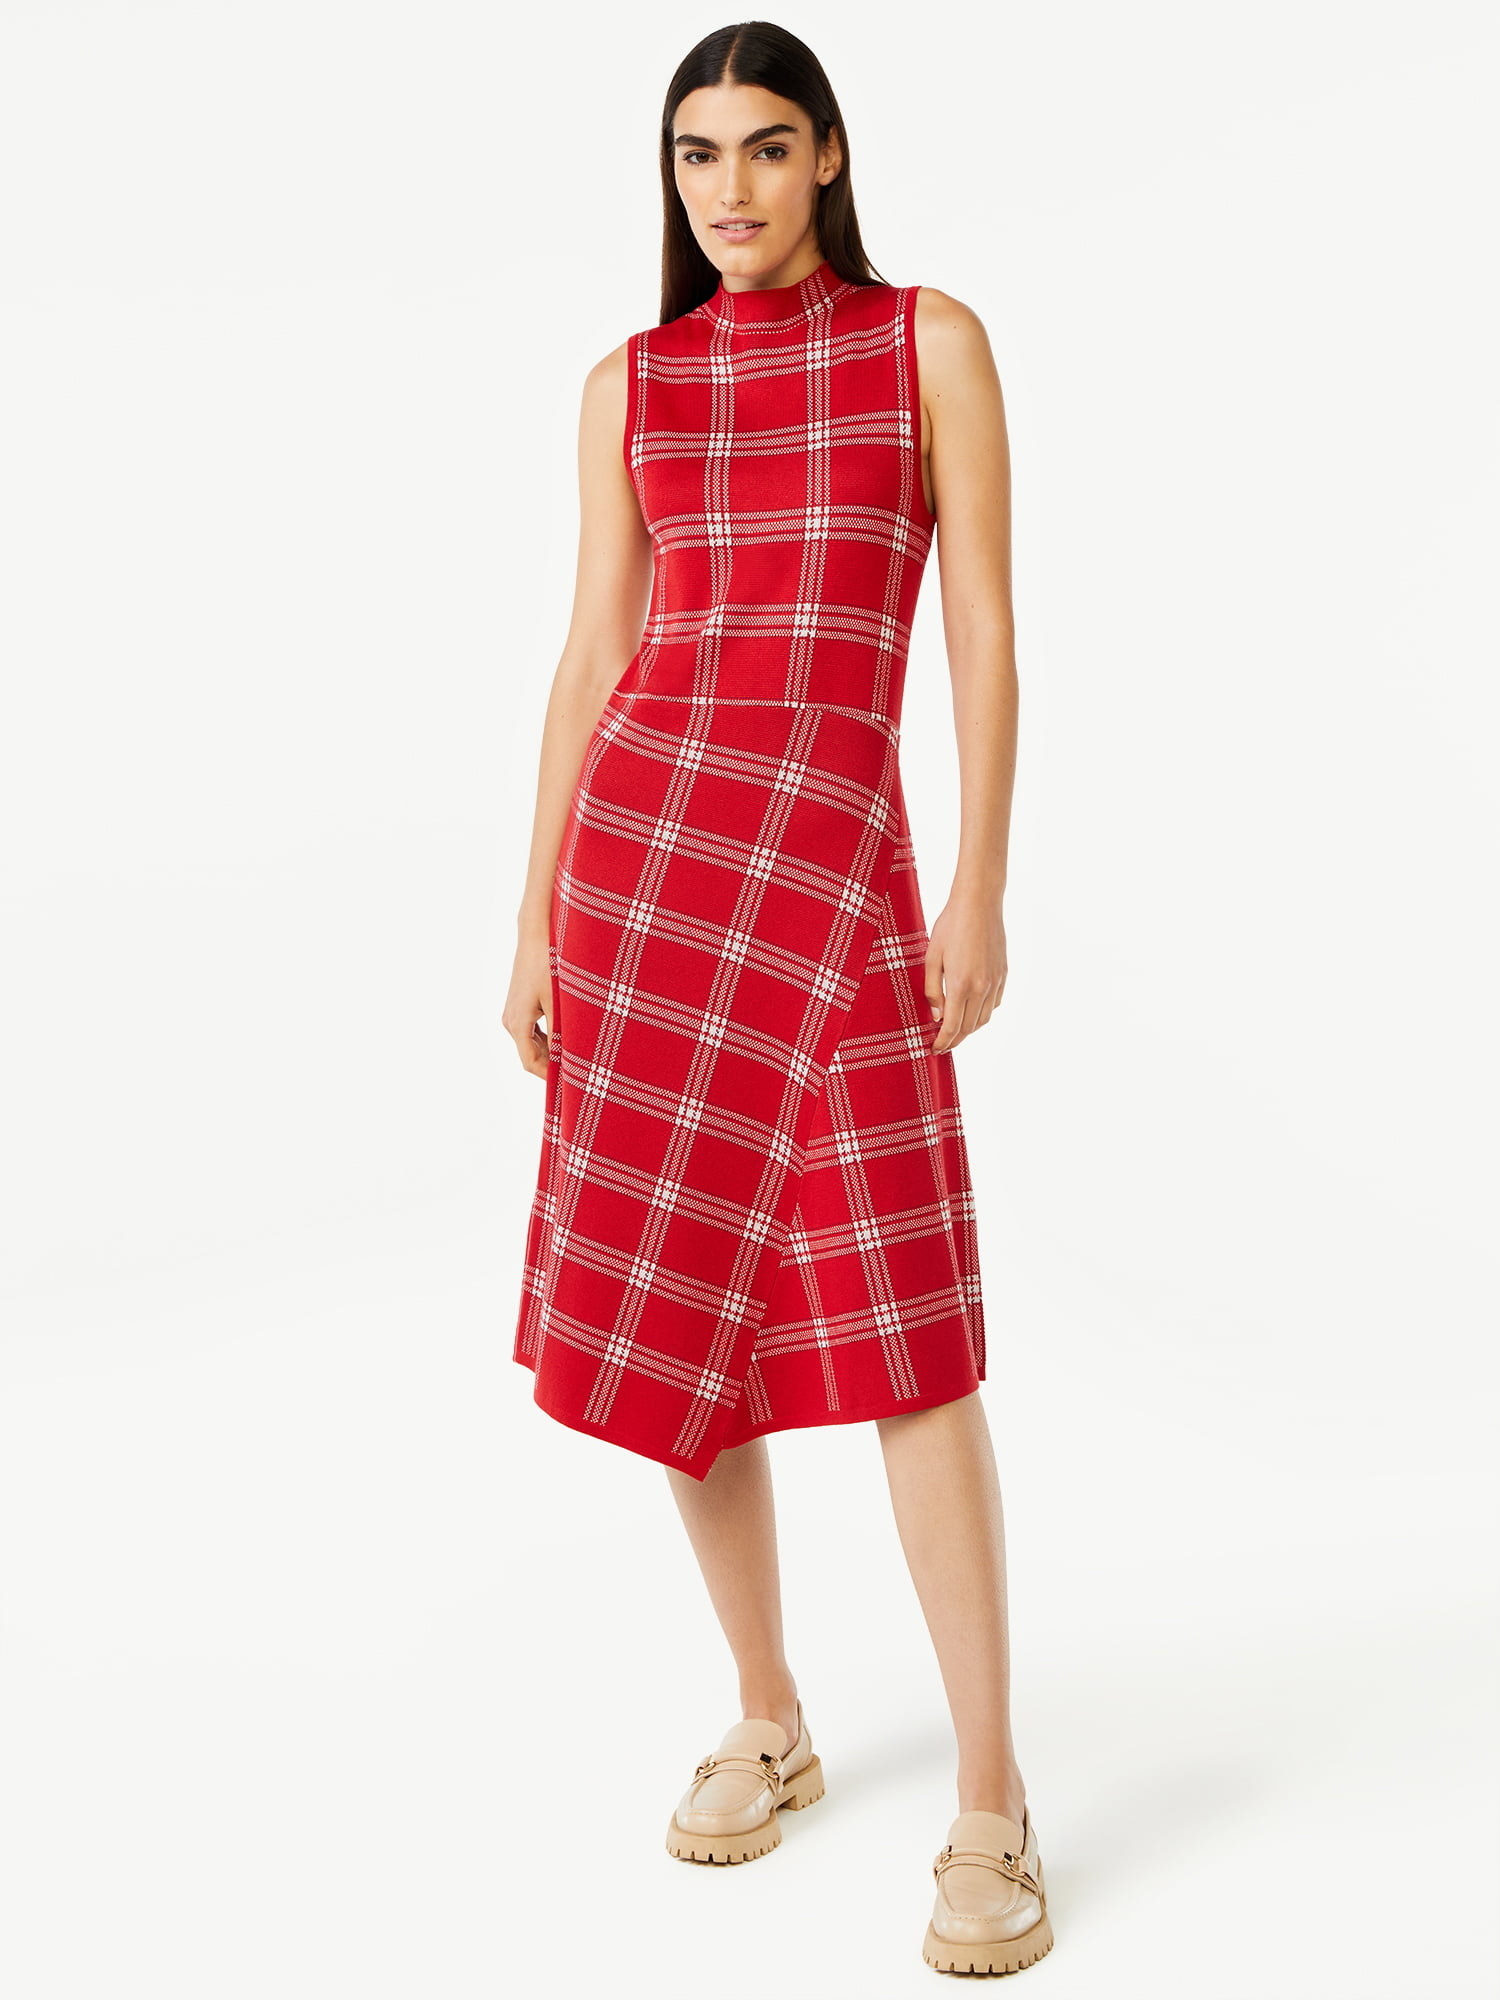 a model wearing the red plaid dress